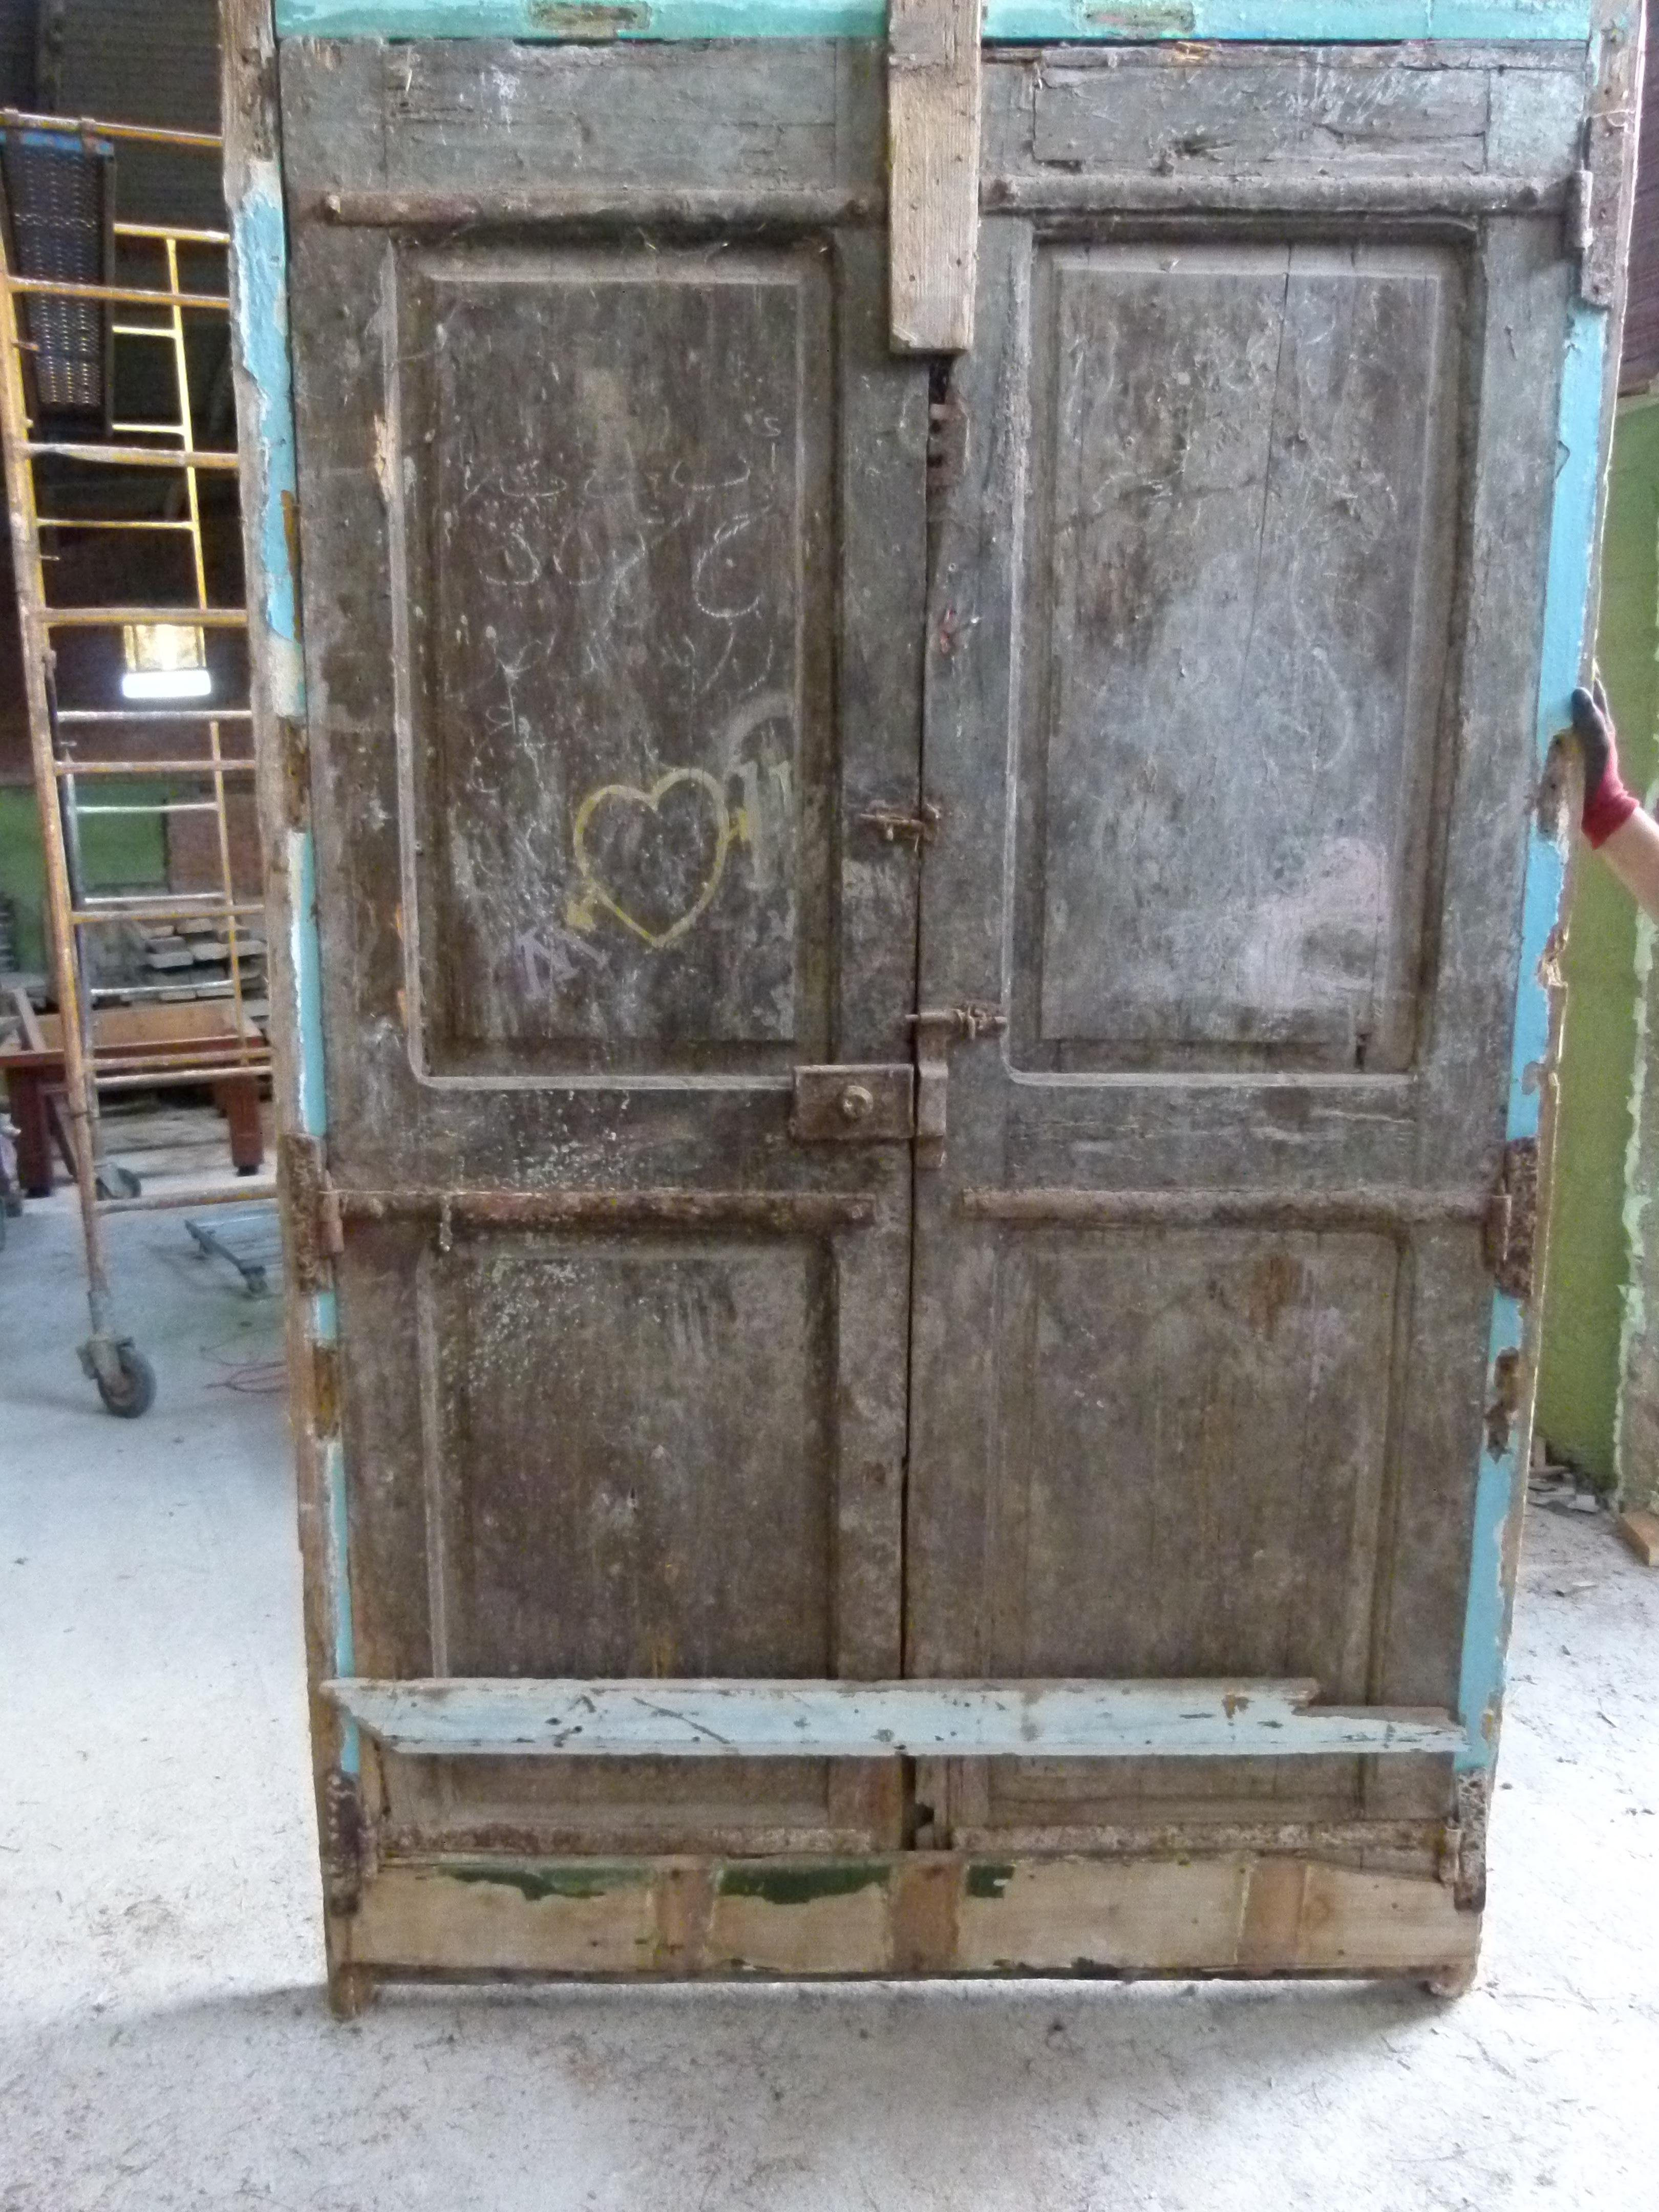 19th century double front door with patina in Art Nouveau style from Catalonien, Spain.
Carved wood typical from this period.
The door is framed and working but needs some restoration as some parts are damaged.
The original patina of the door and